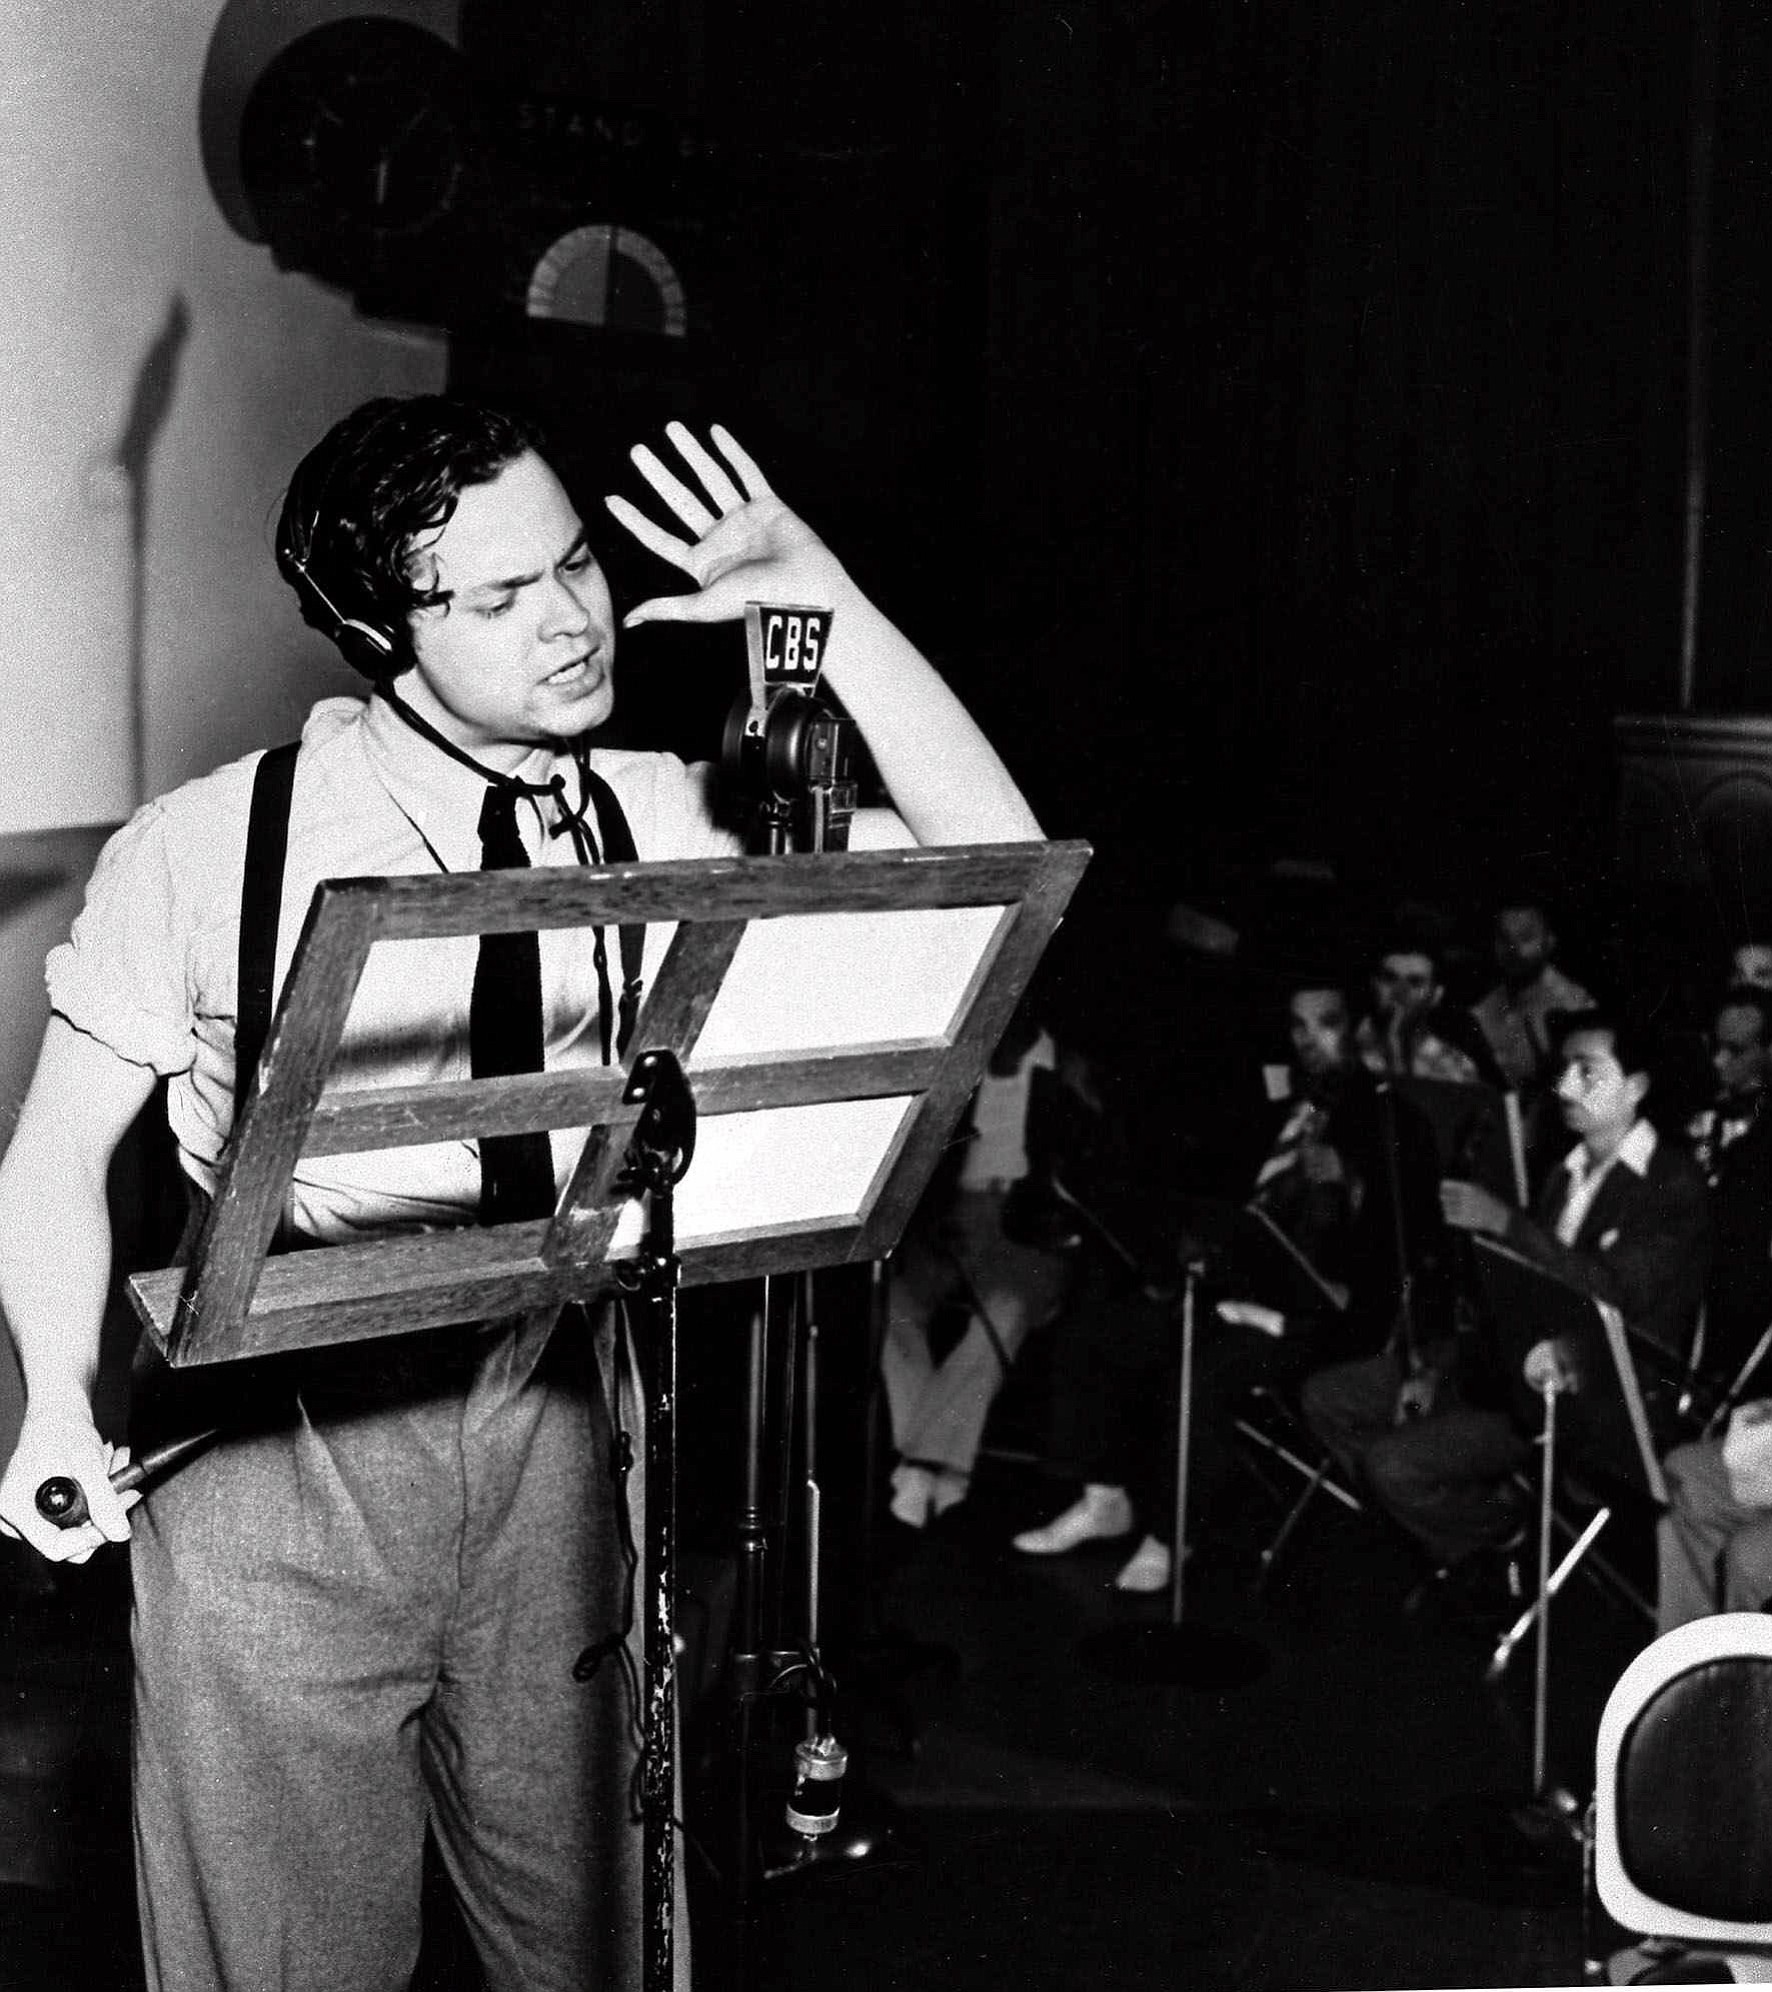 Orson Welles reads from his script during the 1938 broadcast his radio show &quot;The War of the Worlds.&quot; Wells' fictional account of a Martian invasion of Earth created widespread panic in the minds of thousands of listeners.